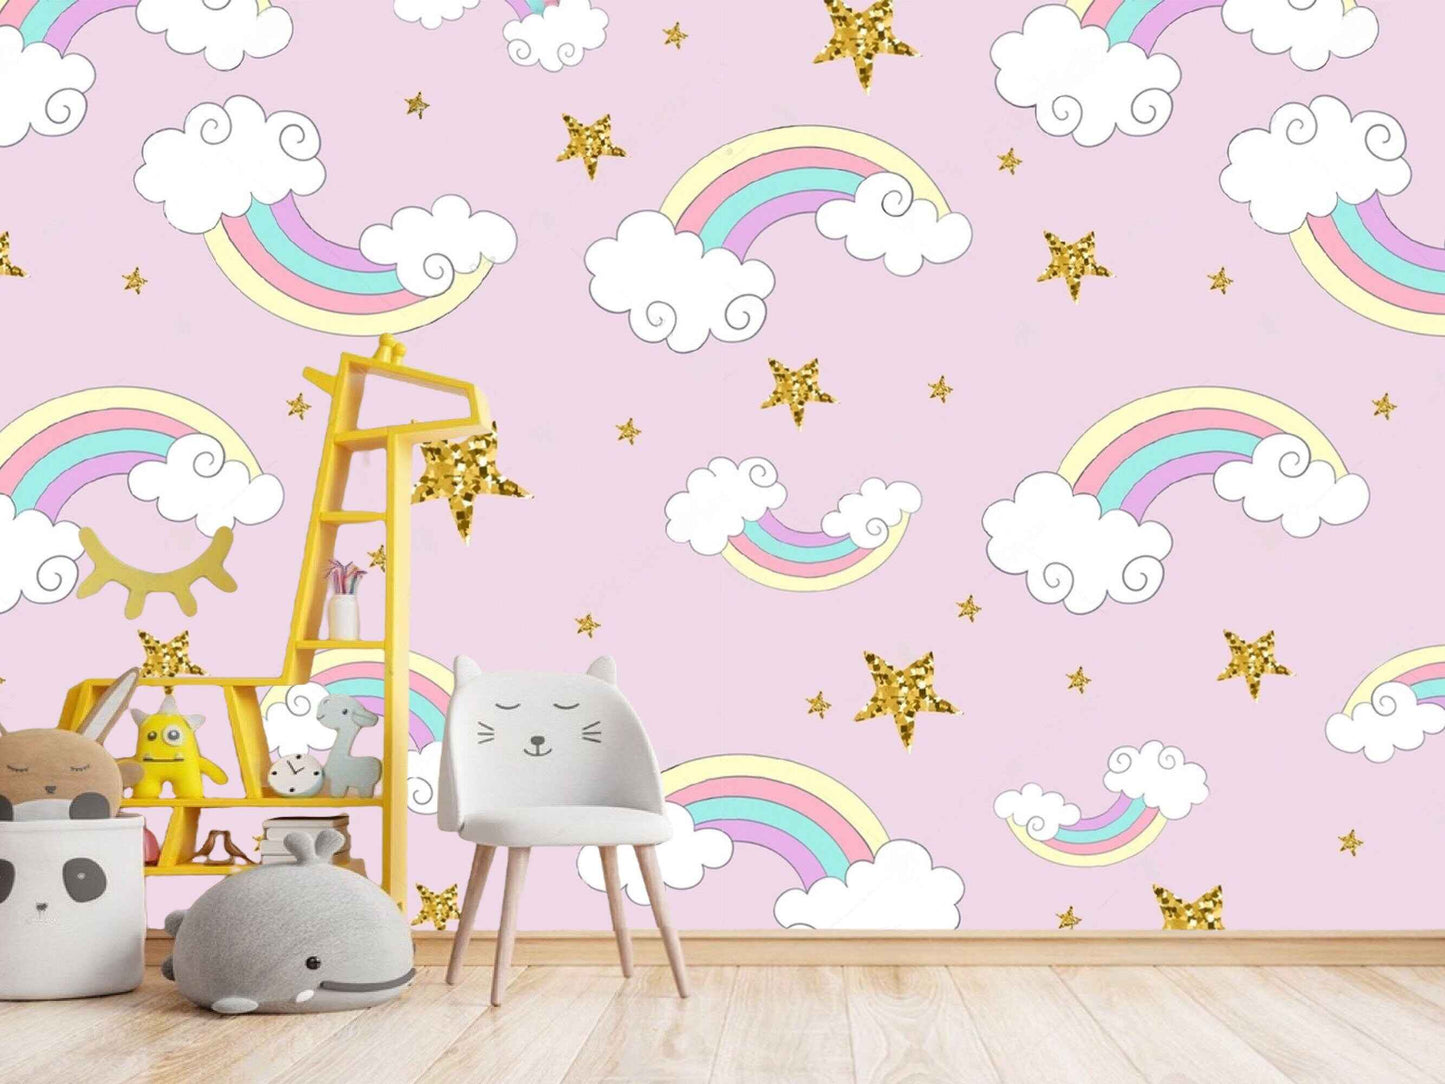 Whimsical rainbow wall decor in a girls' room, sparking imagination and creating a joyful ambiance.